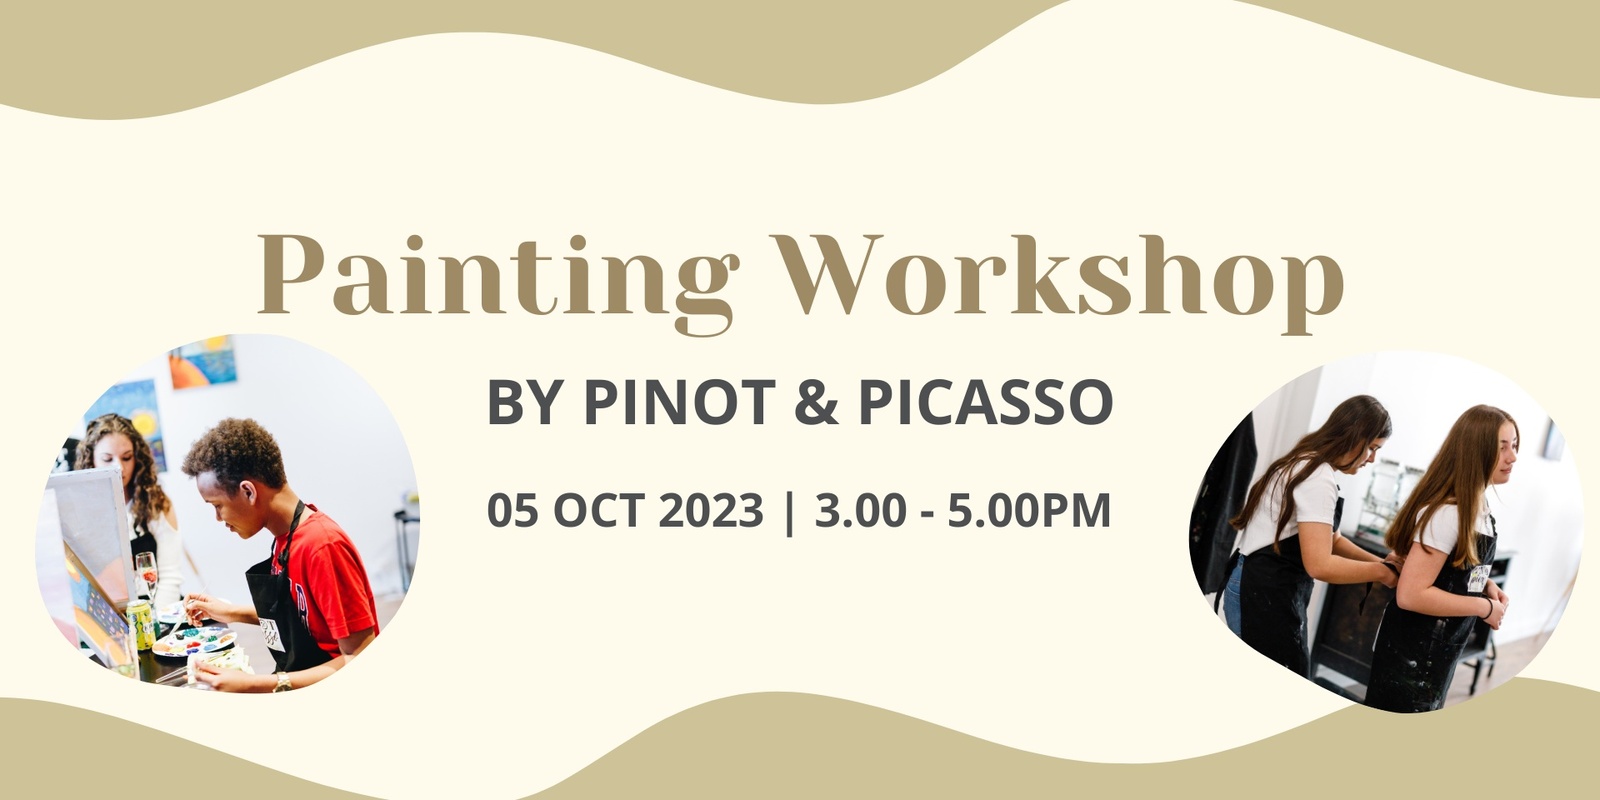 Banner image for Painting Workshop by Pinot & Picasso